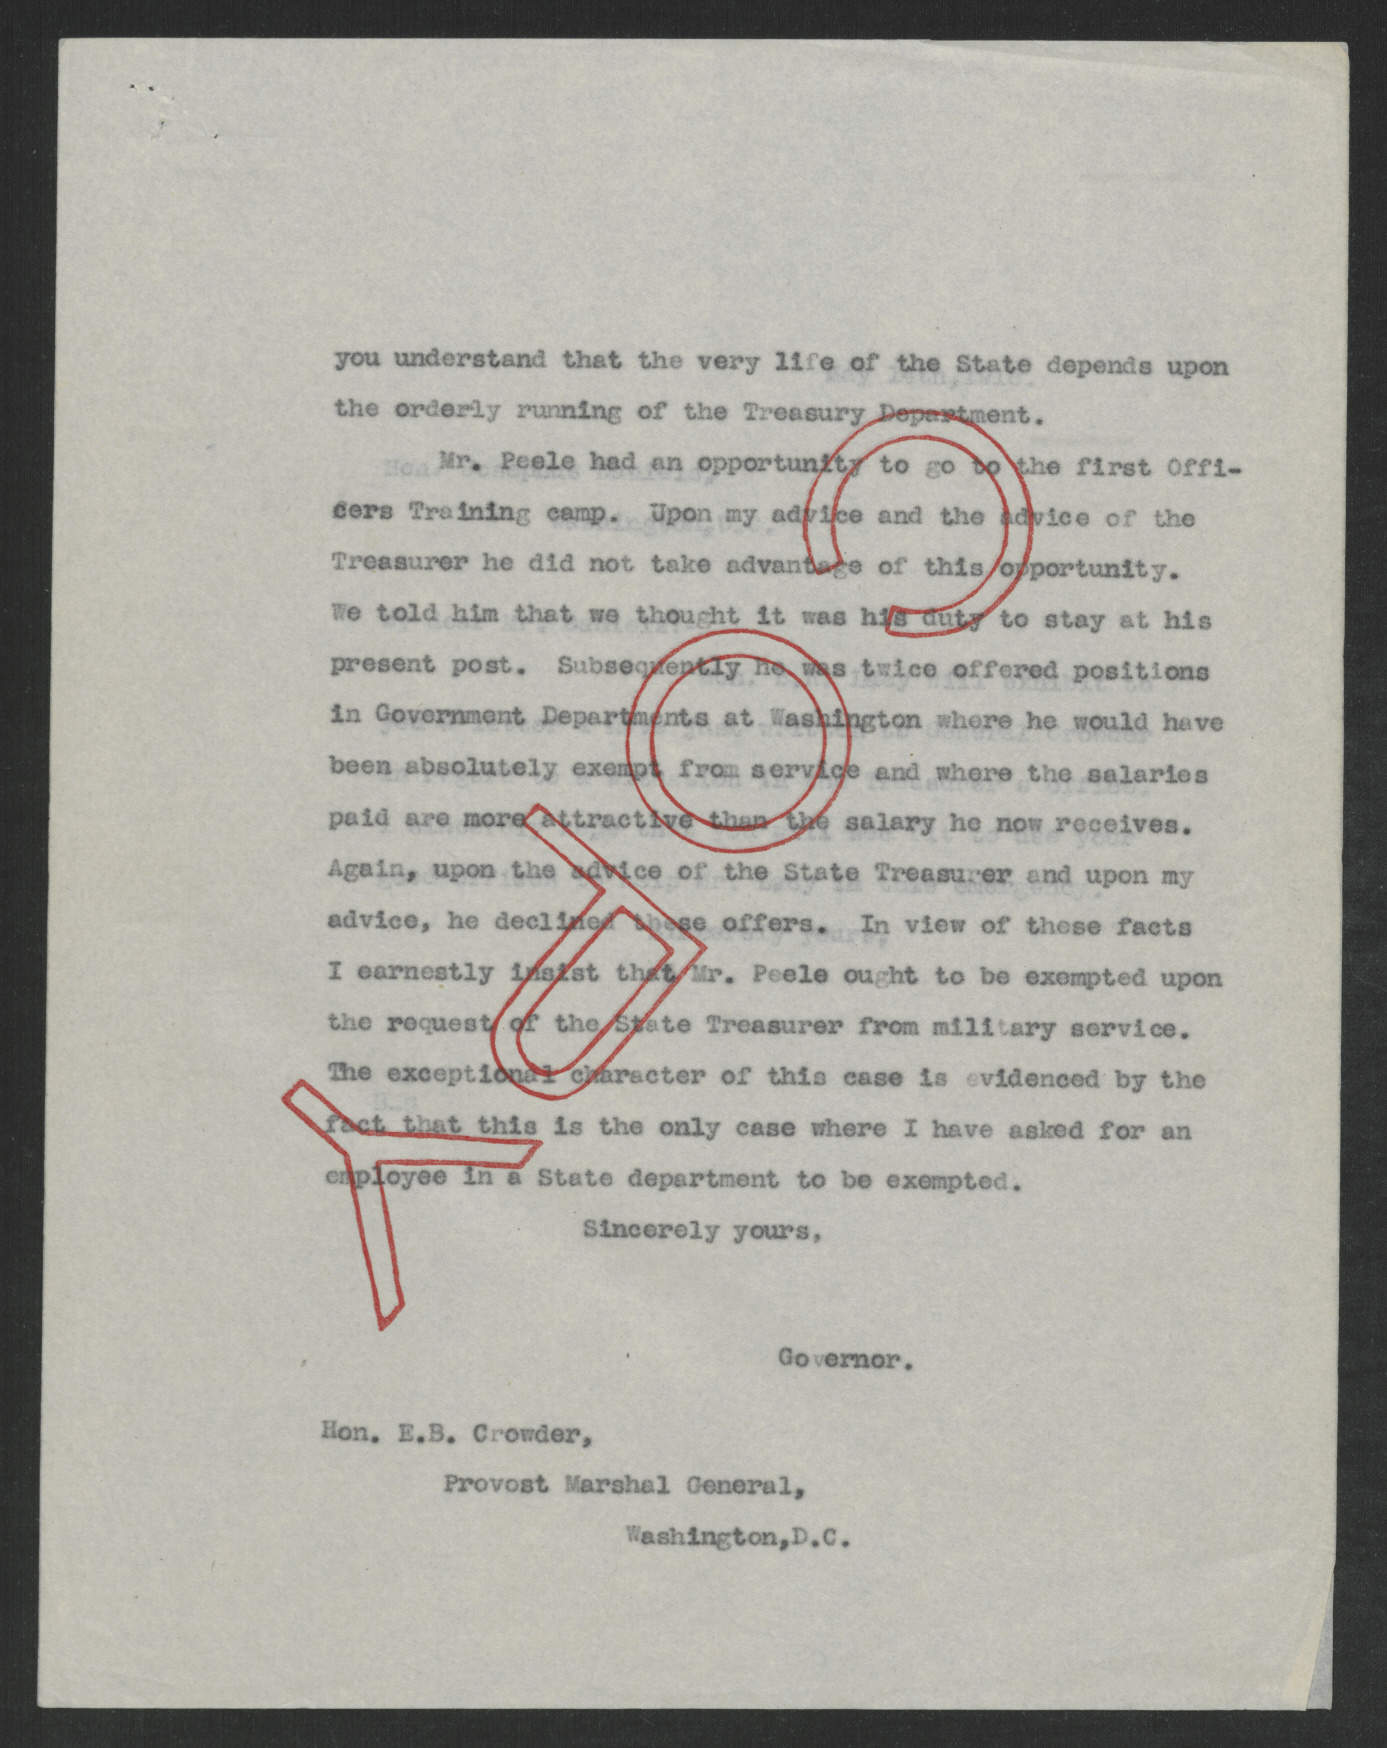 Letter from Thomas W. Bickett to Enoch H. Crowder, May 14, 1918, page 2